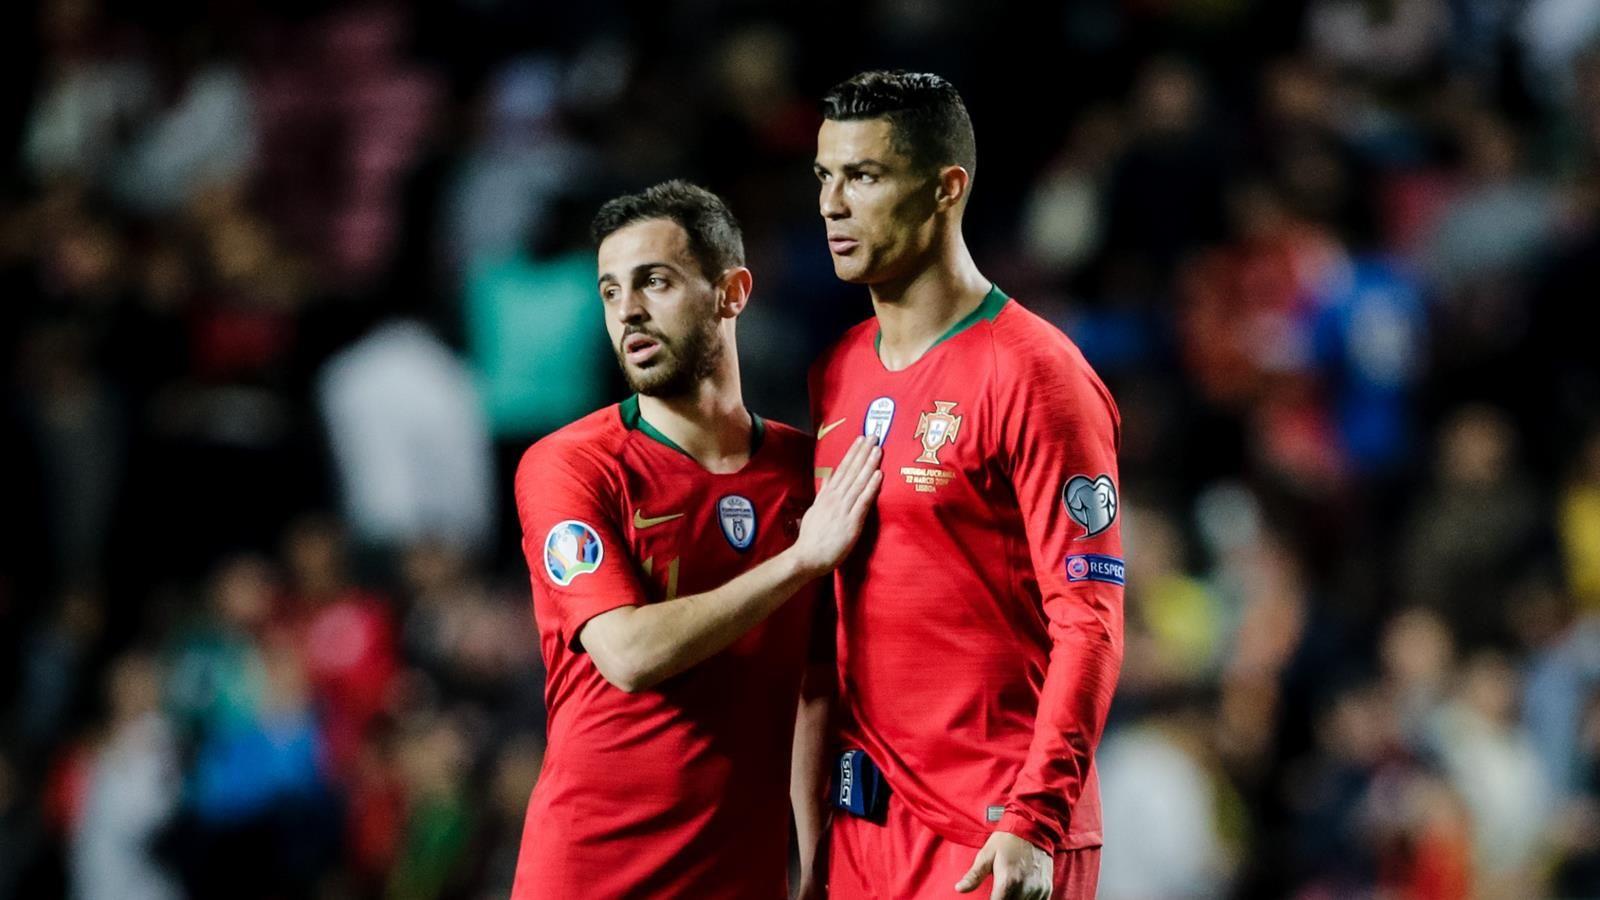 Football news the shackles off, Portugal, or risk crumbling